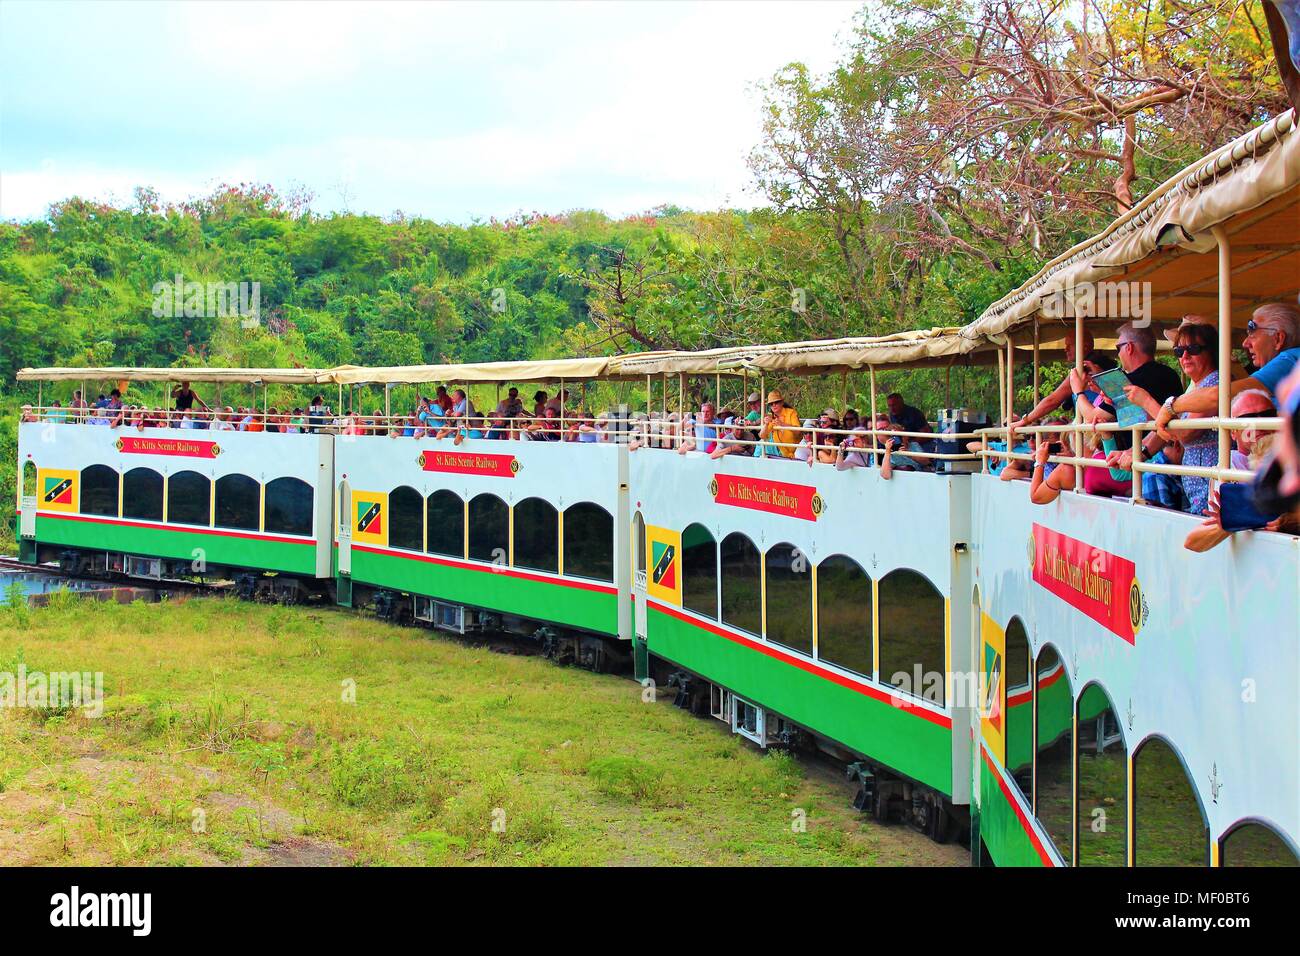 ST KITTS, CARIBBEAN - MARCH 1ST 2018: The 'St Kitts Scenic Railway' tourist attraction. Stock Photo